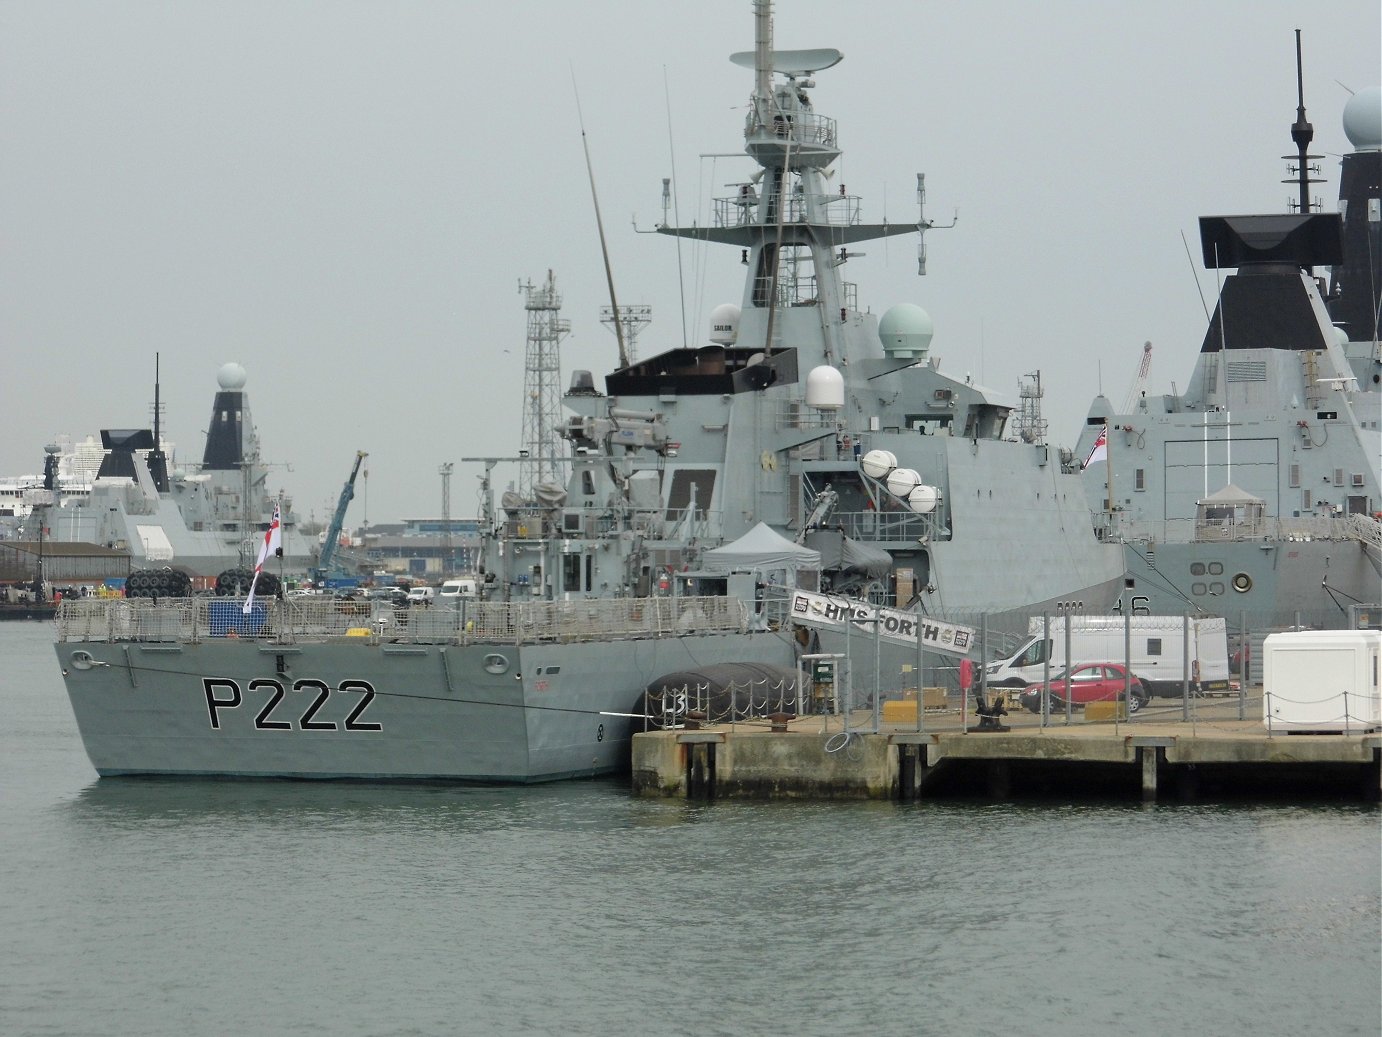 River class offshore patrol vessel H.M.S. Forth at Portsmouth Naval Base 23 April 2019